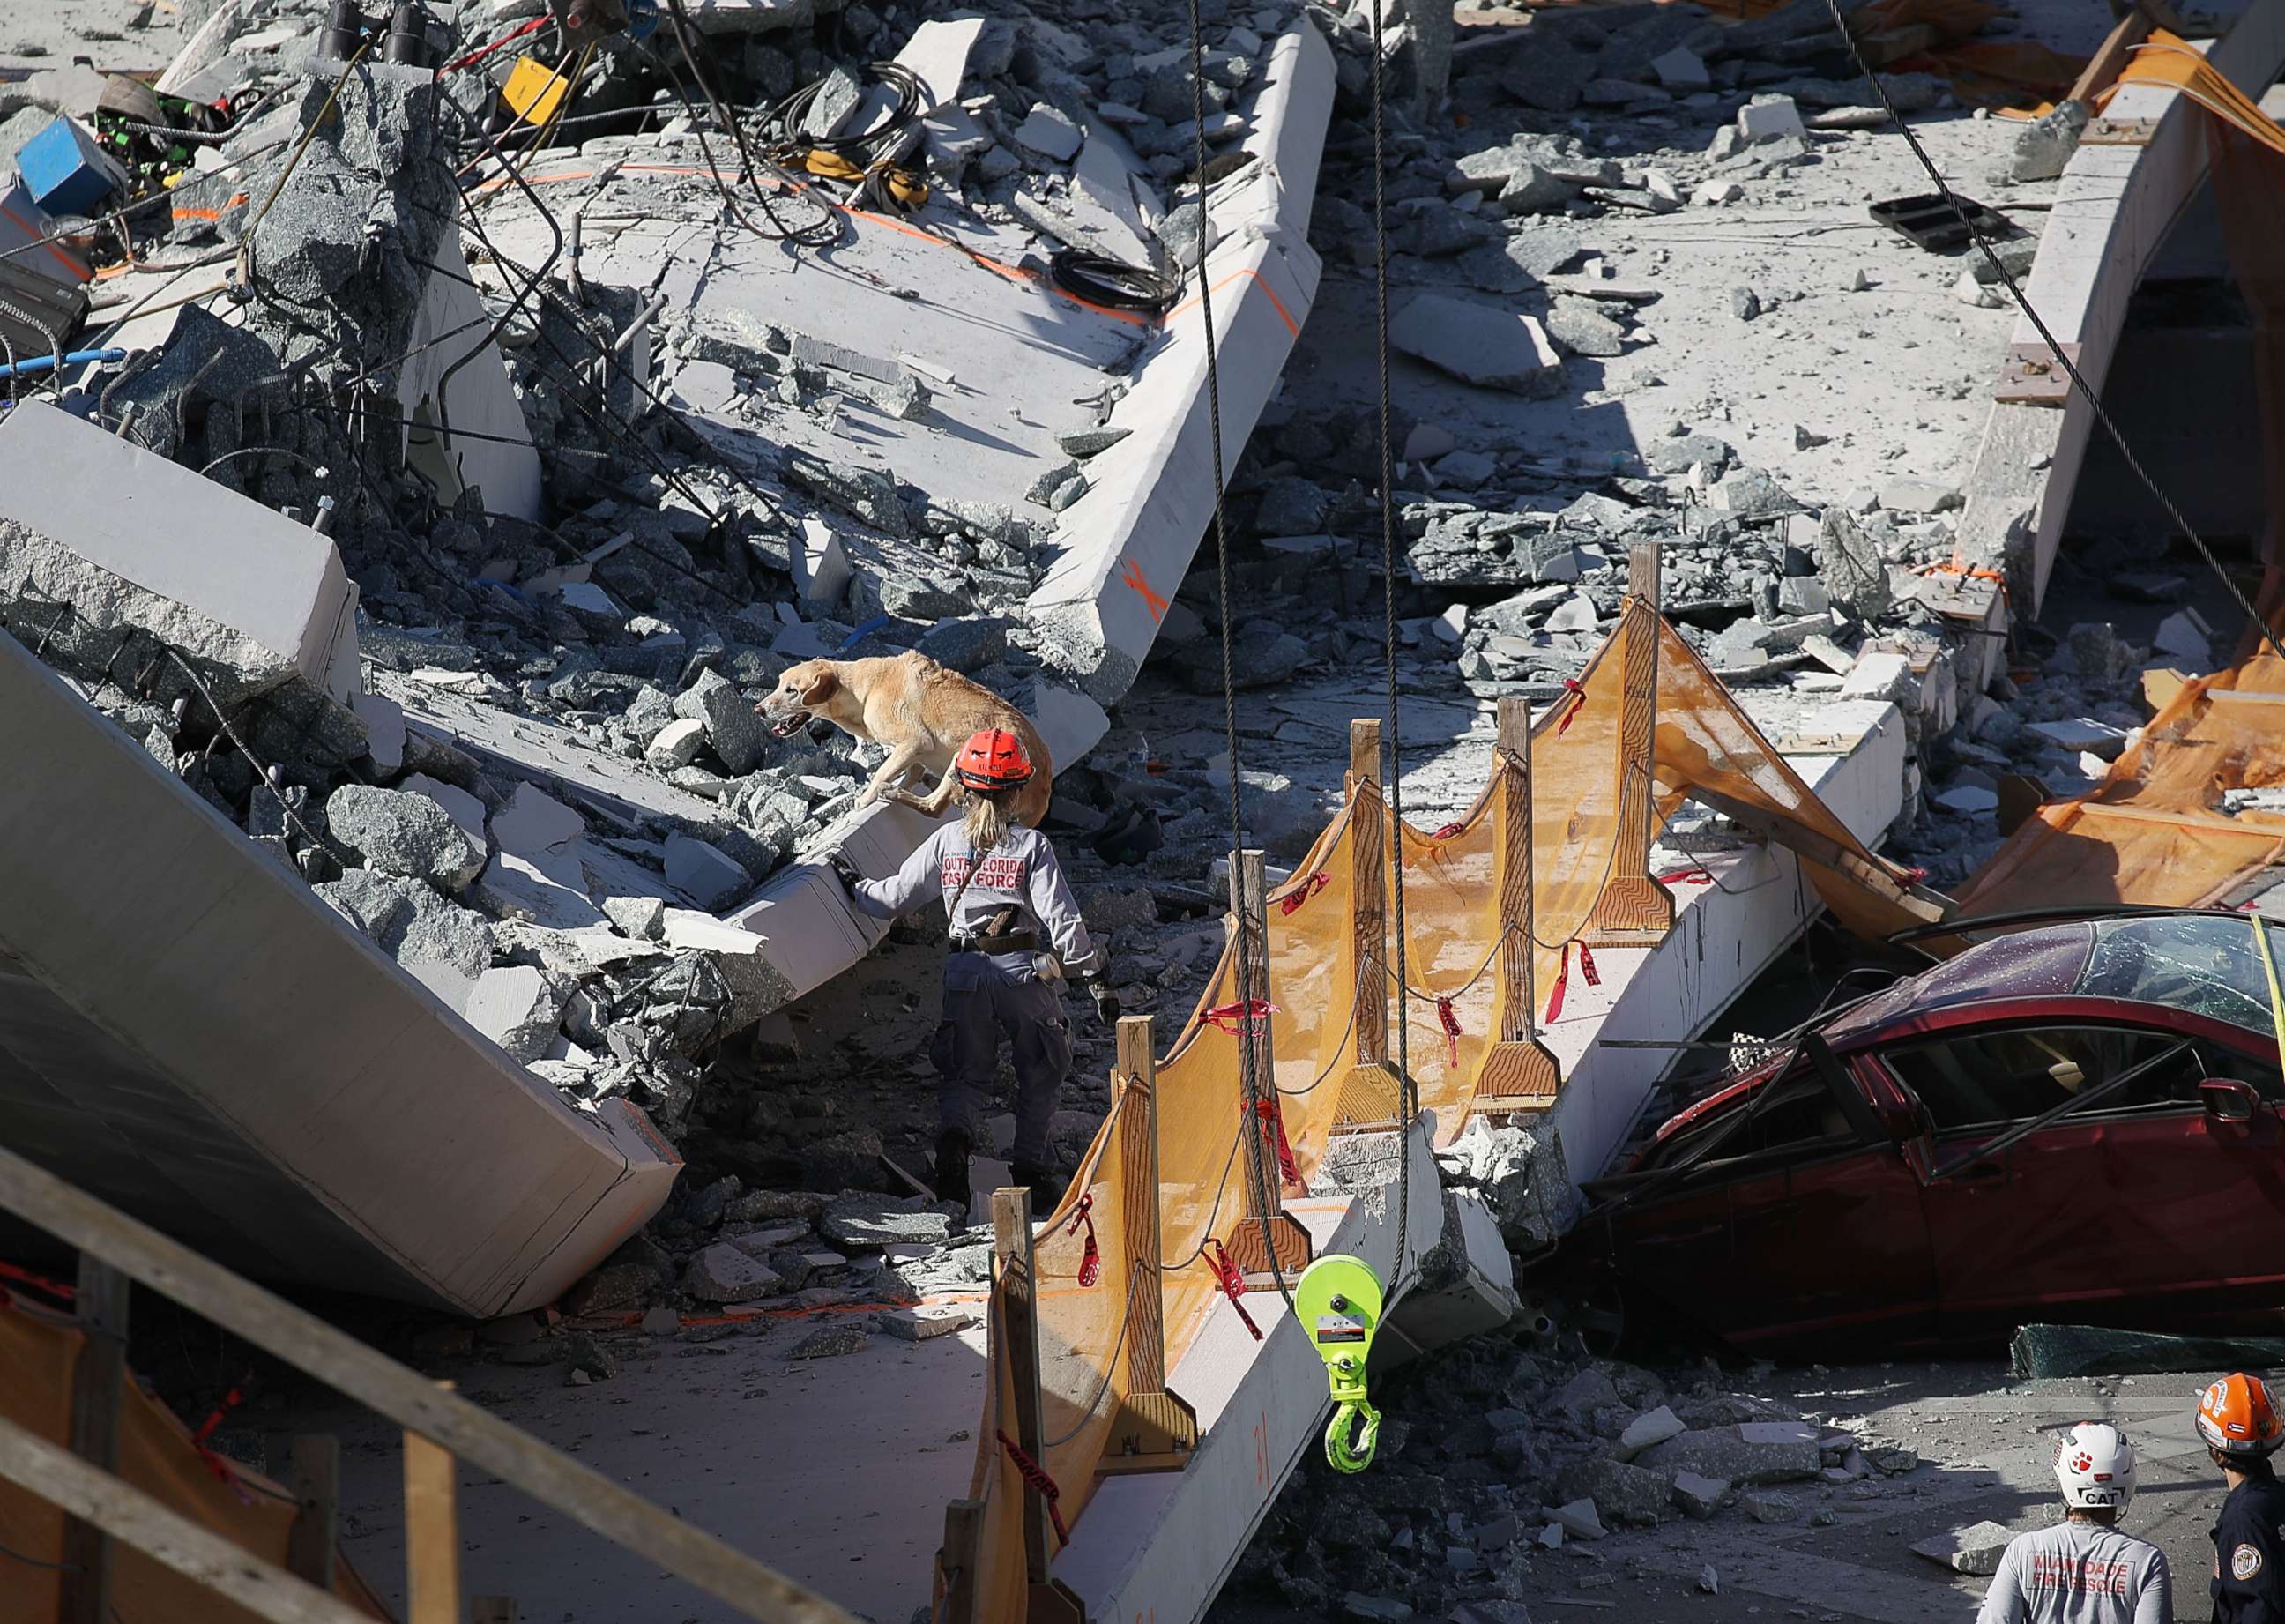 PHOTO: A rescue dog and its handler work at the scene where a pedestrian bridge collapsed at Florida International University on March 15, 2018 in Miami.